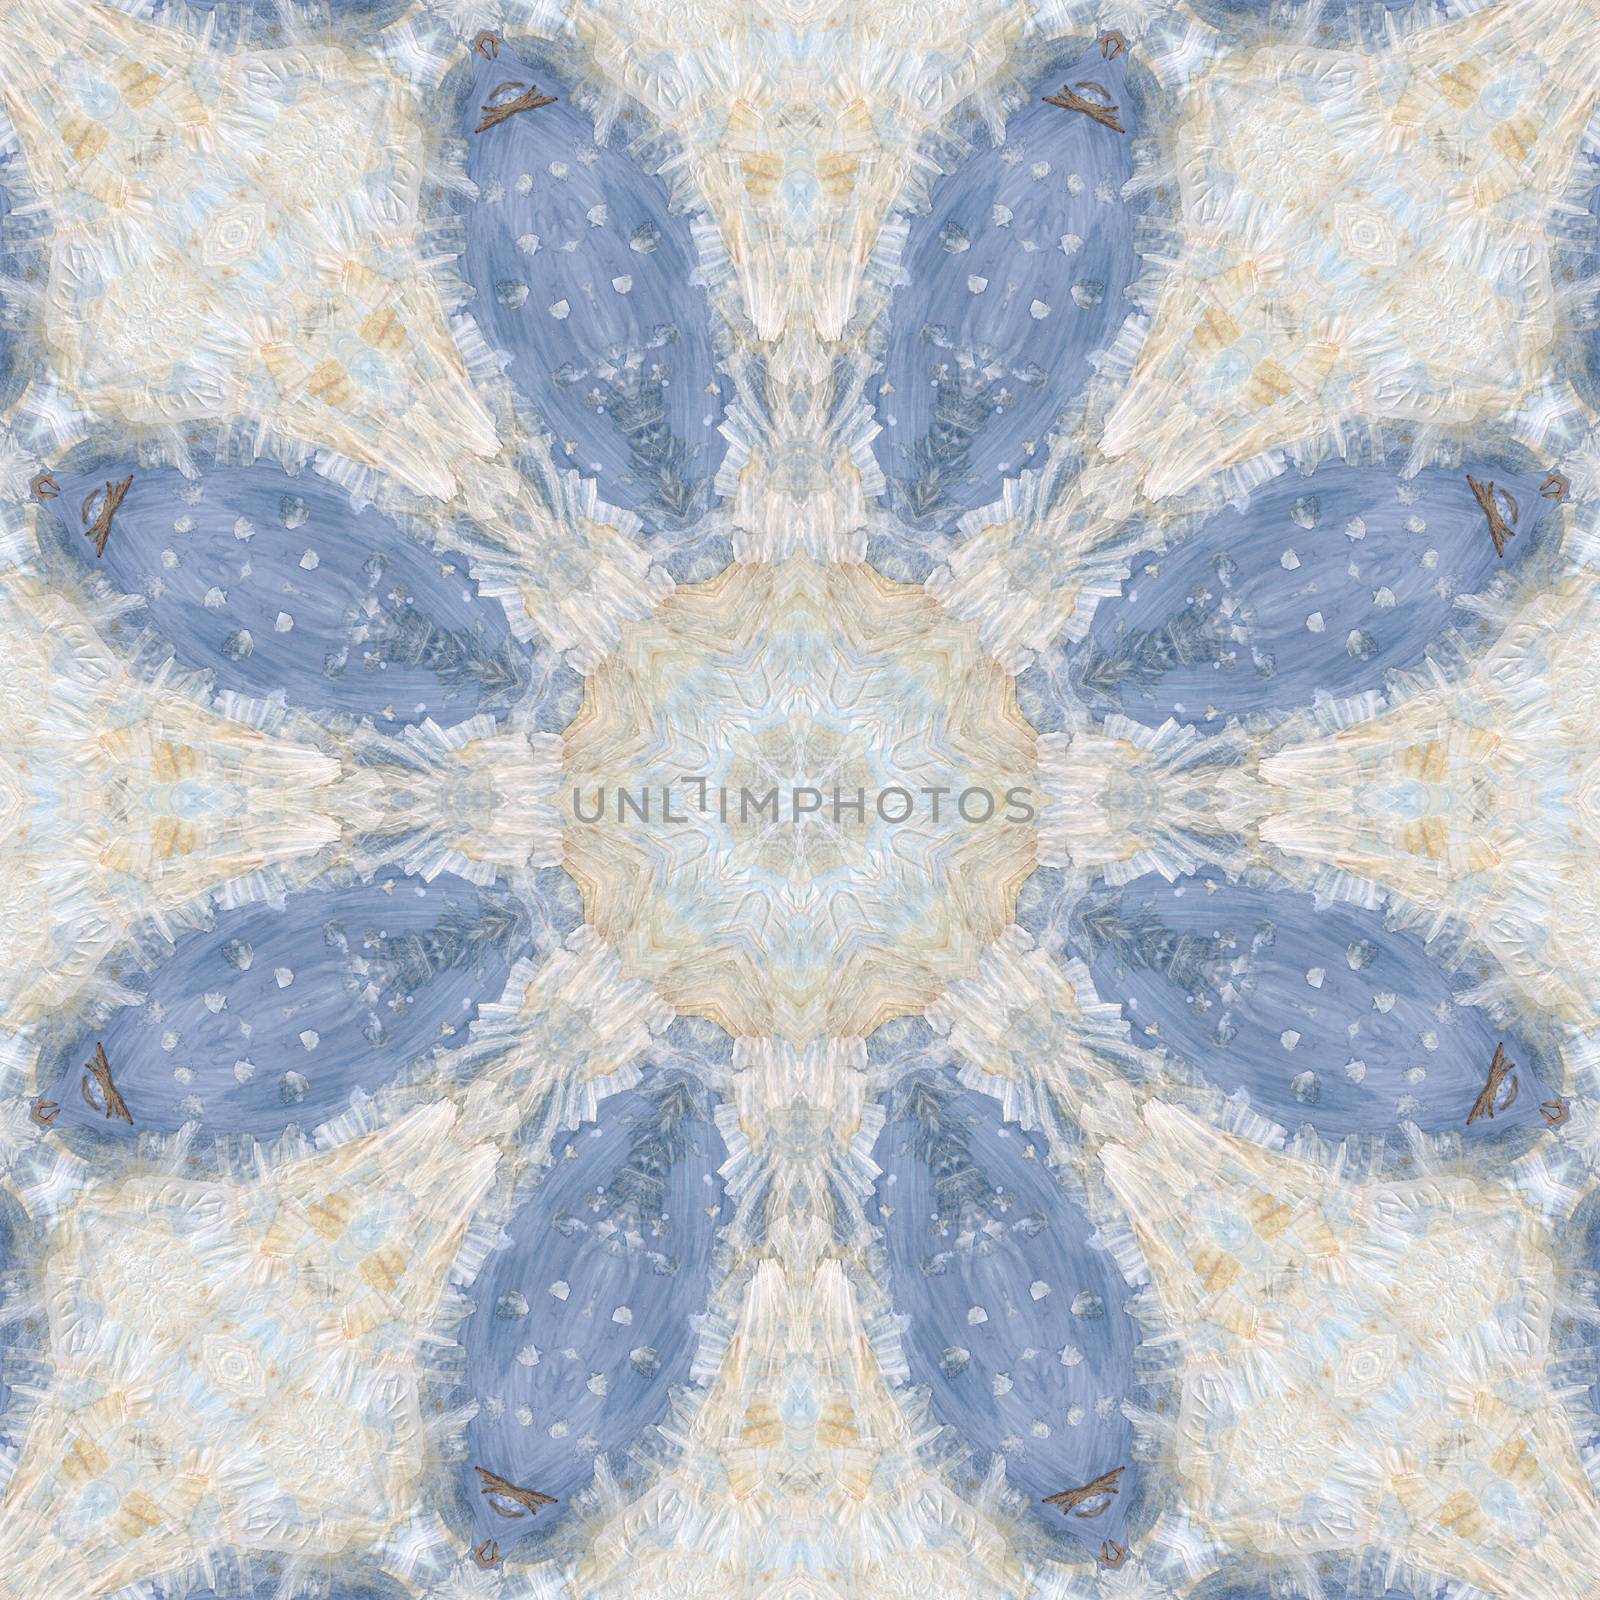 Abstract artistic seamless pattern, handmade floral ornament, applique from painted garlic husks, leaves and watercolor background